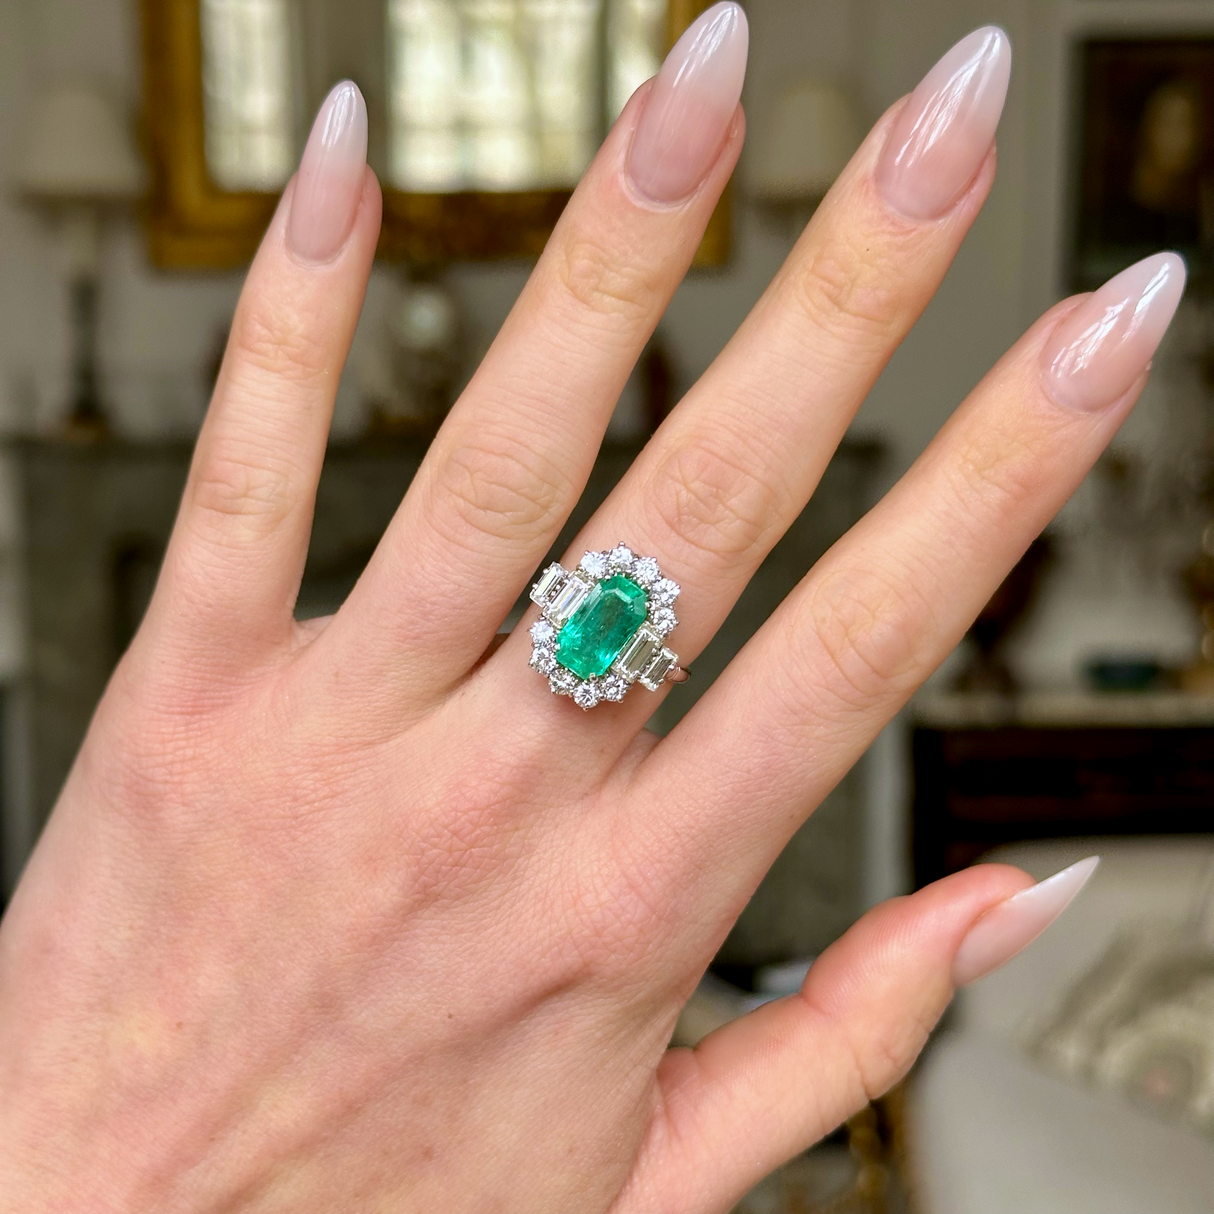 Vintage emerald and diamond cluster ring, worn on hand. 